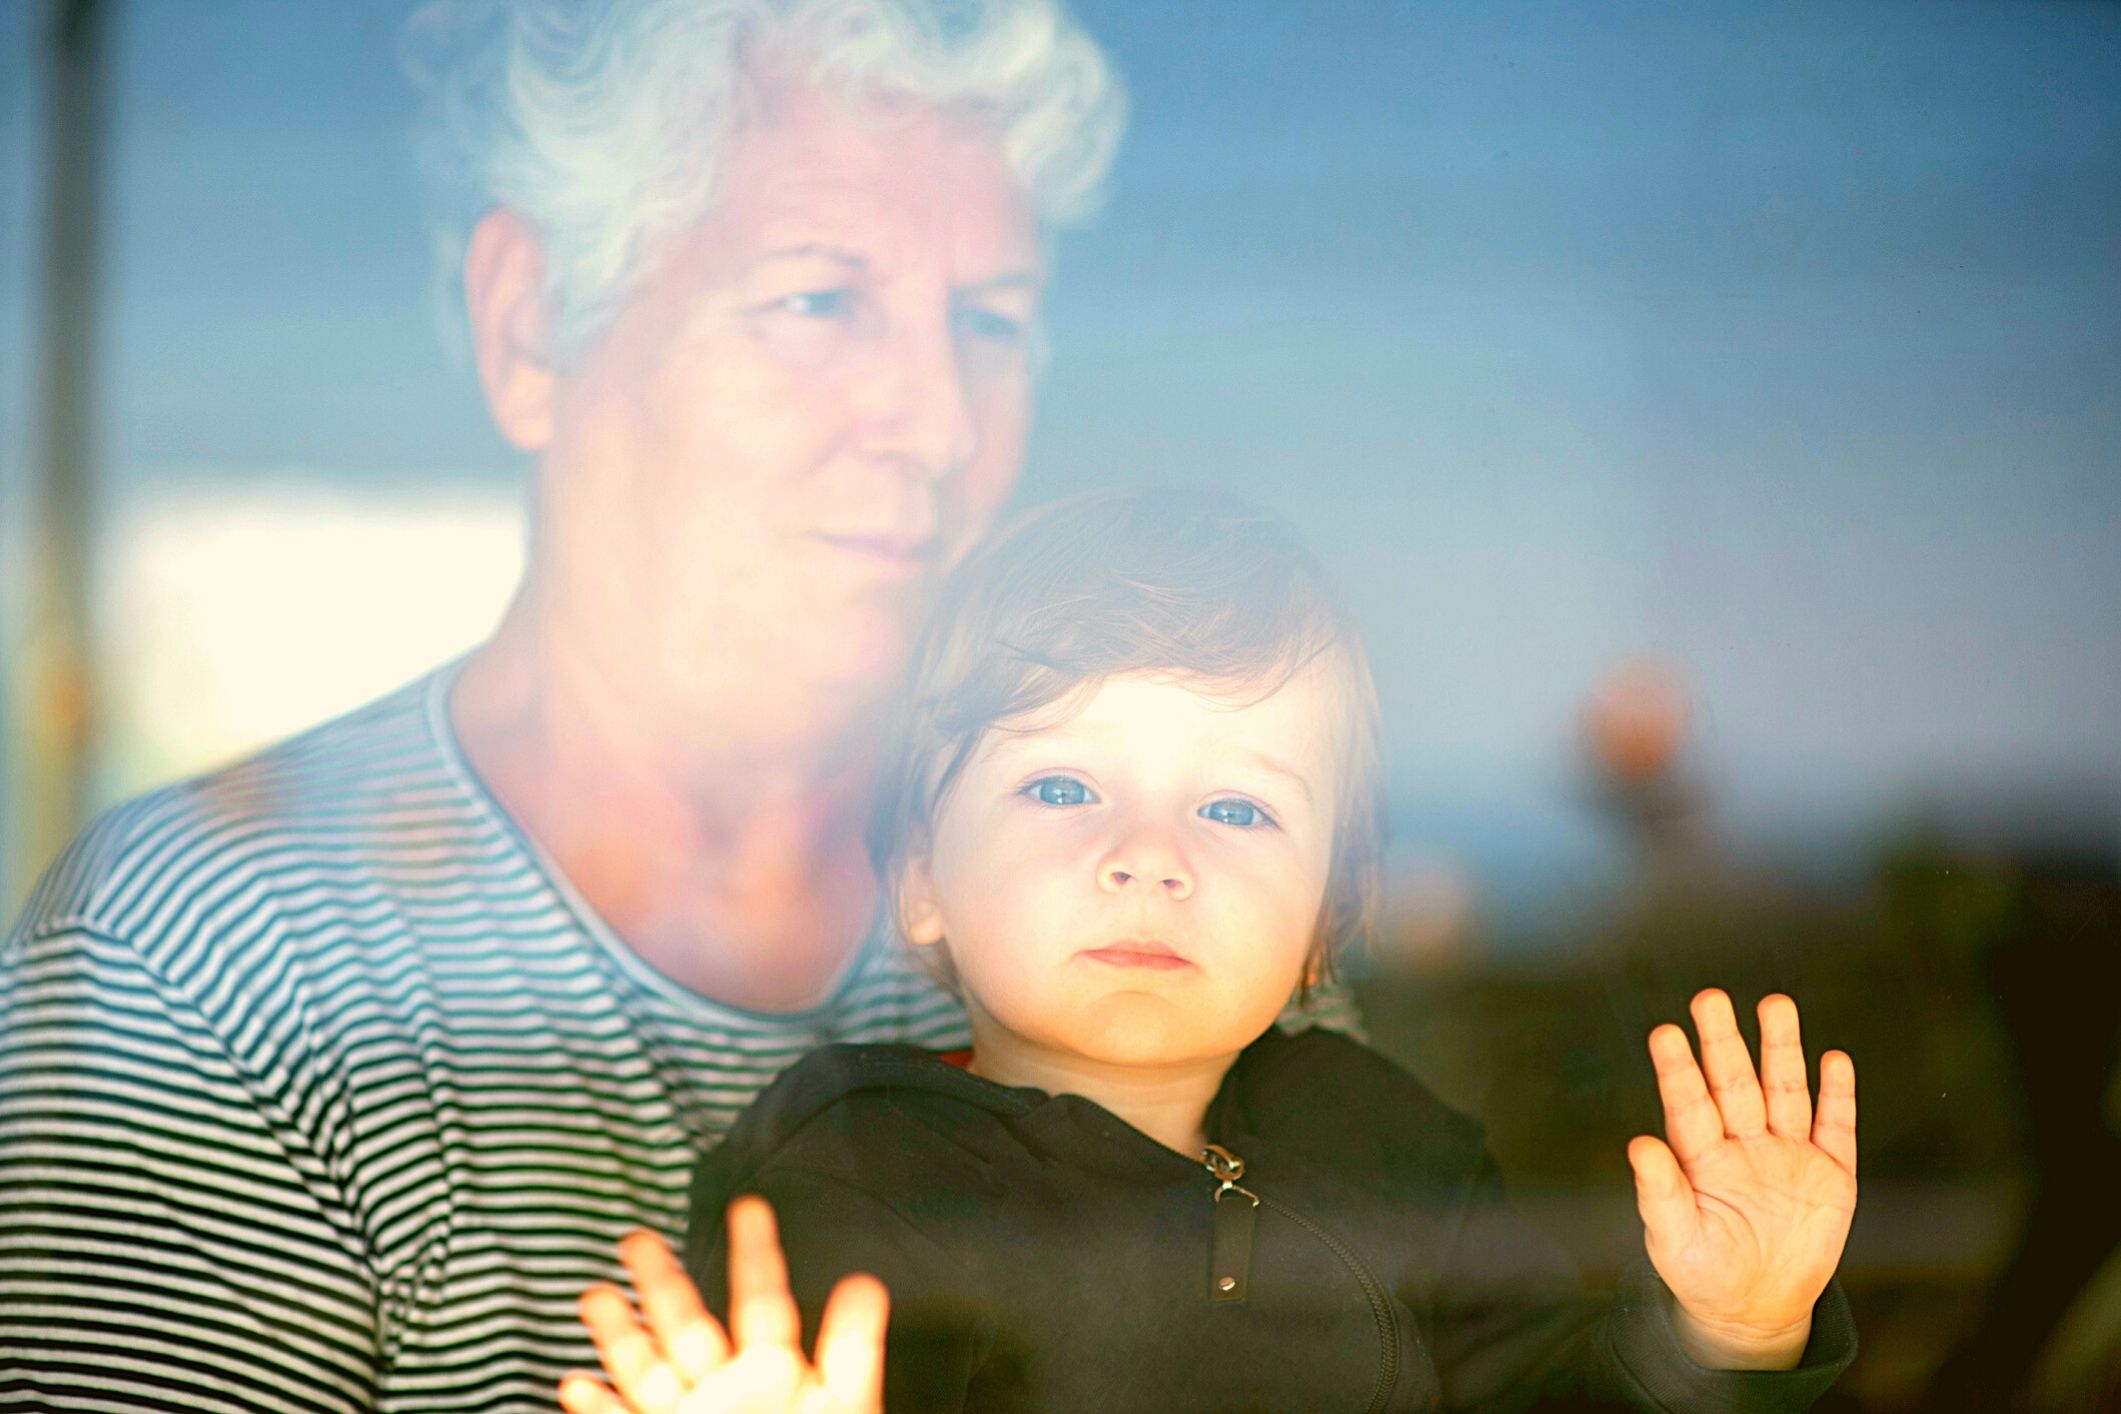 Grandmother’s son demands that she quits her job to look after her grandchild